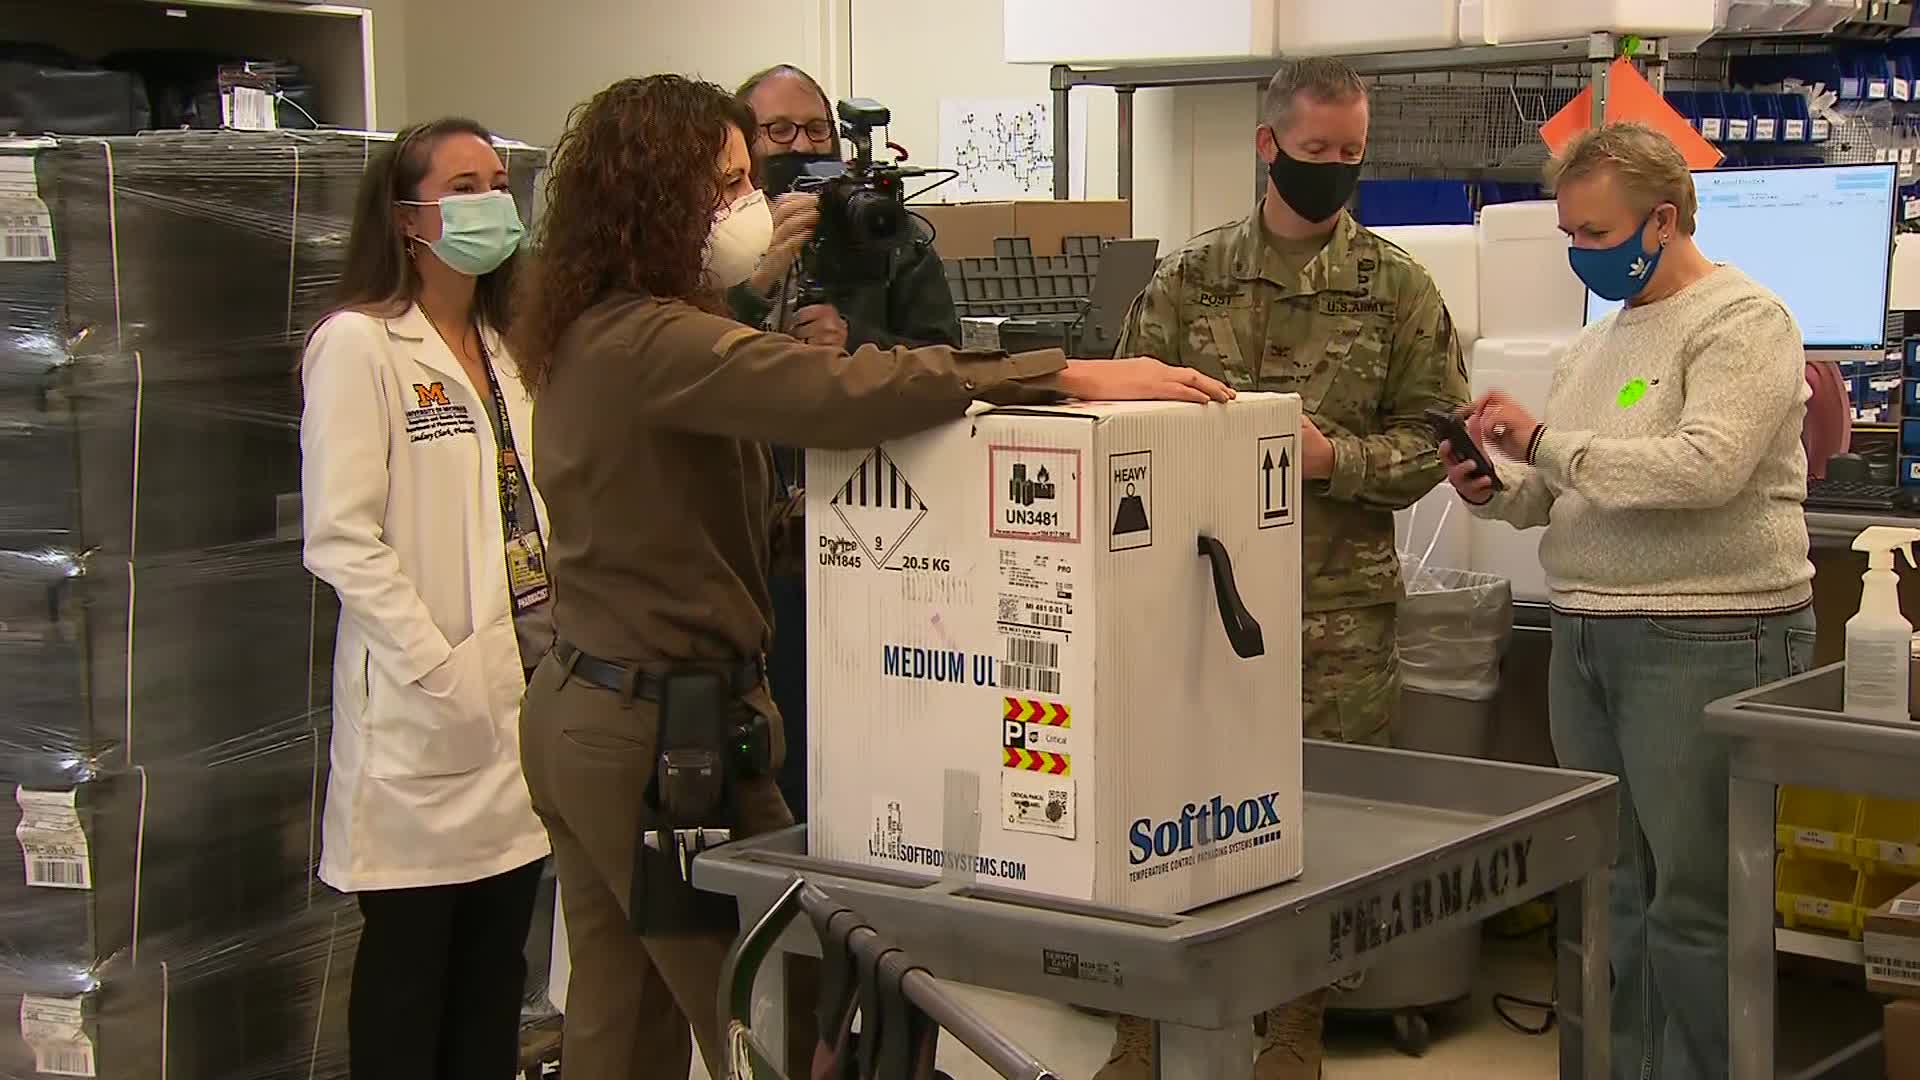 The first Pfizer vaccine shipment arrives via UPS at the University of Michigan Hospital in Ann Arbor on December 14.